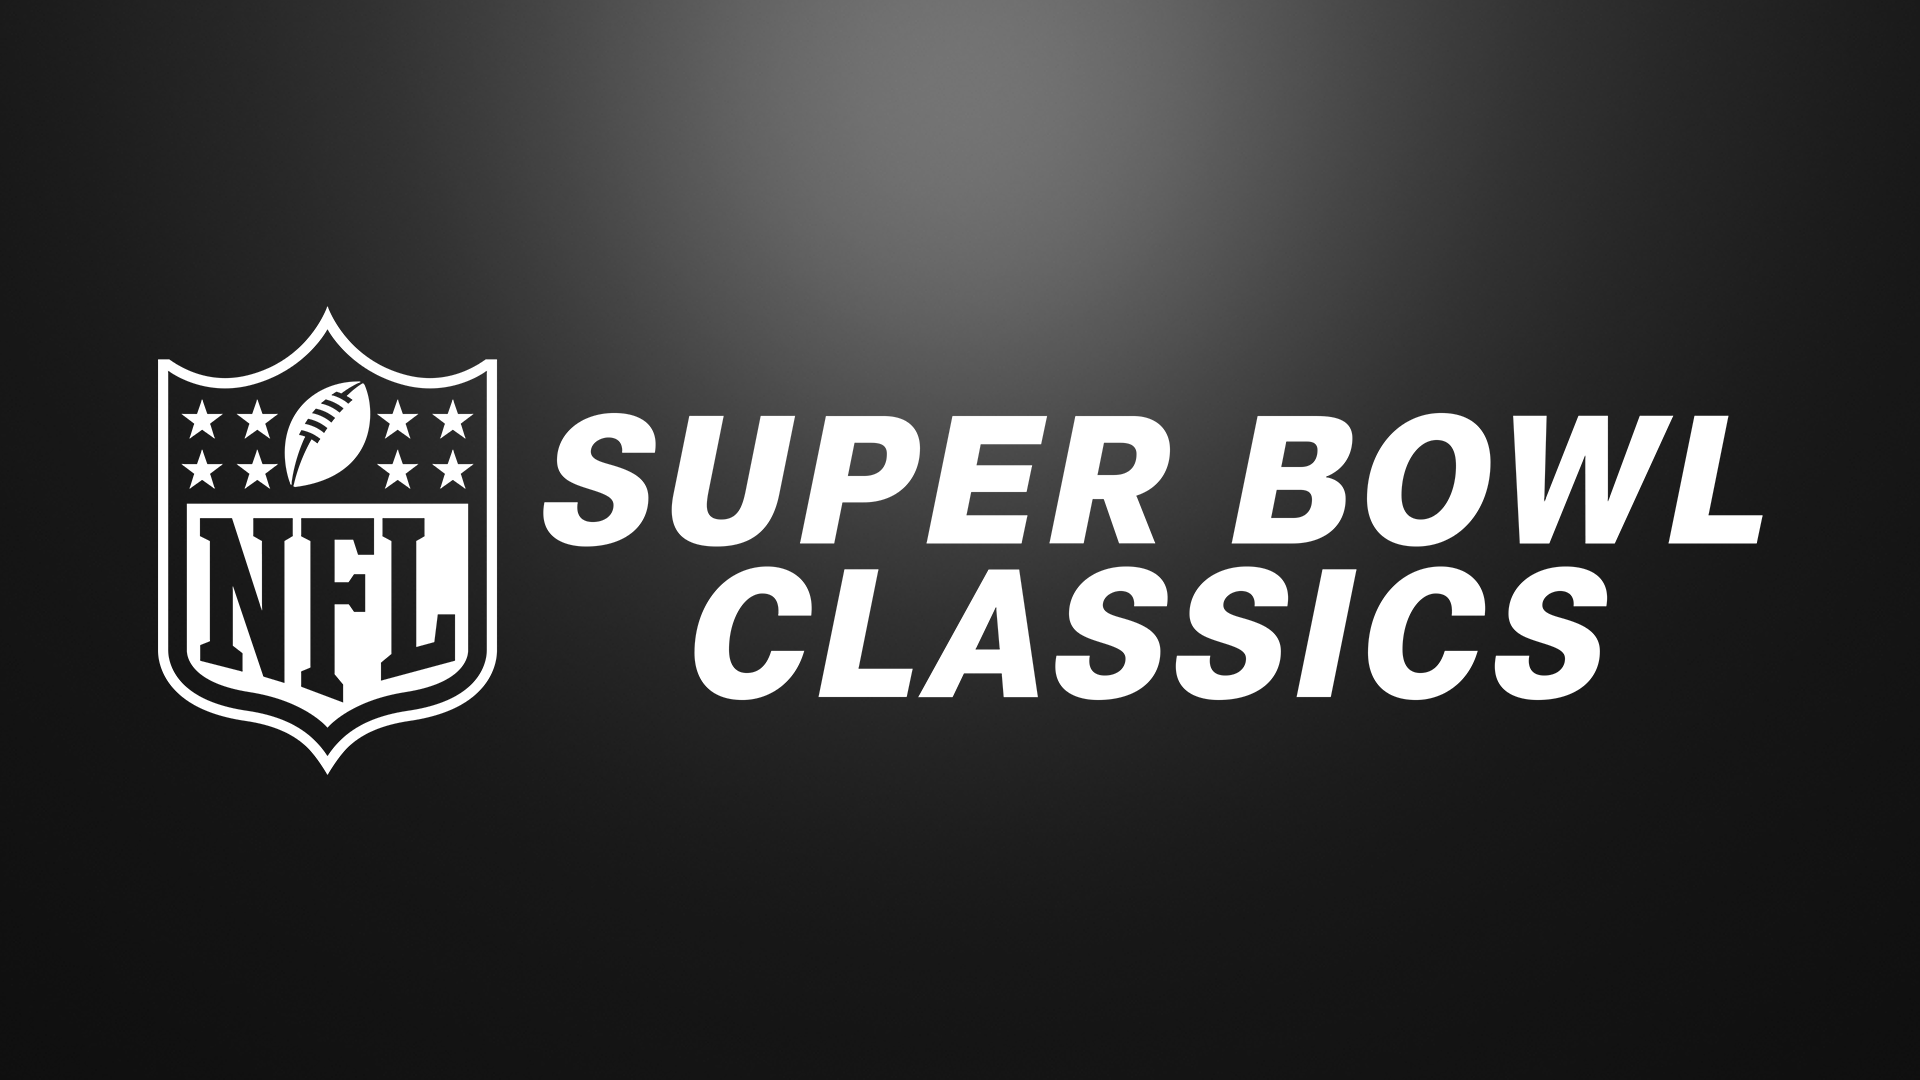 Pluto TV Adds A New Channel Dedicated to Classic NFL Super Bowl Games